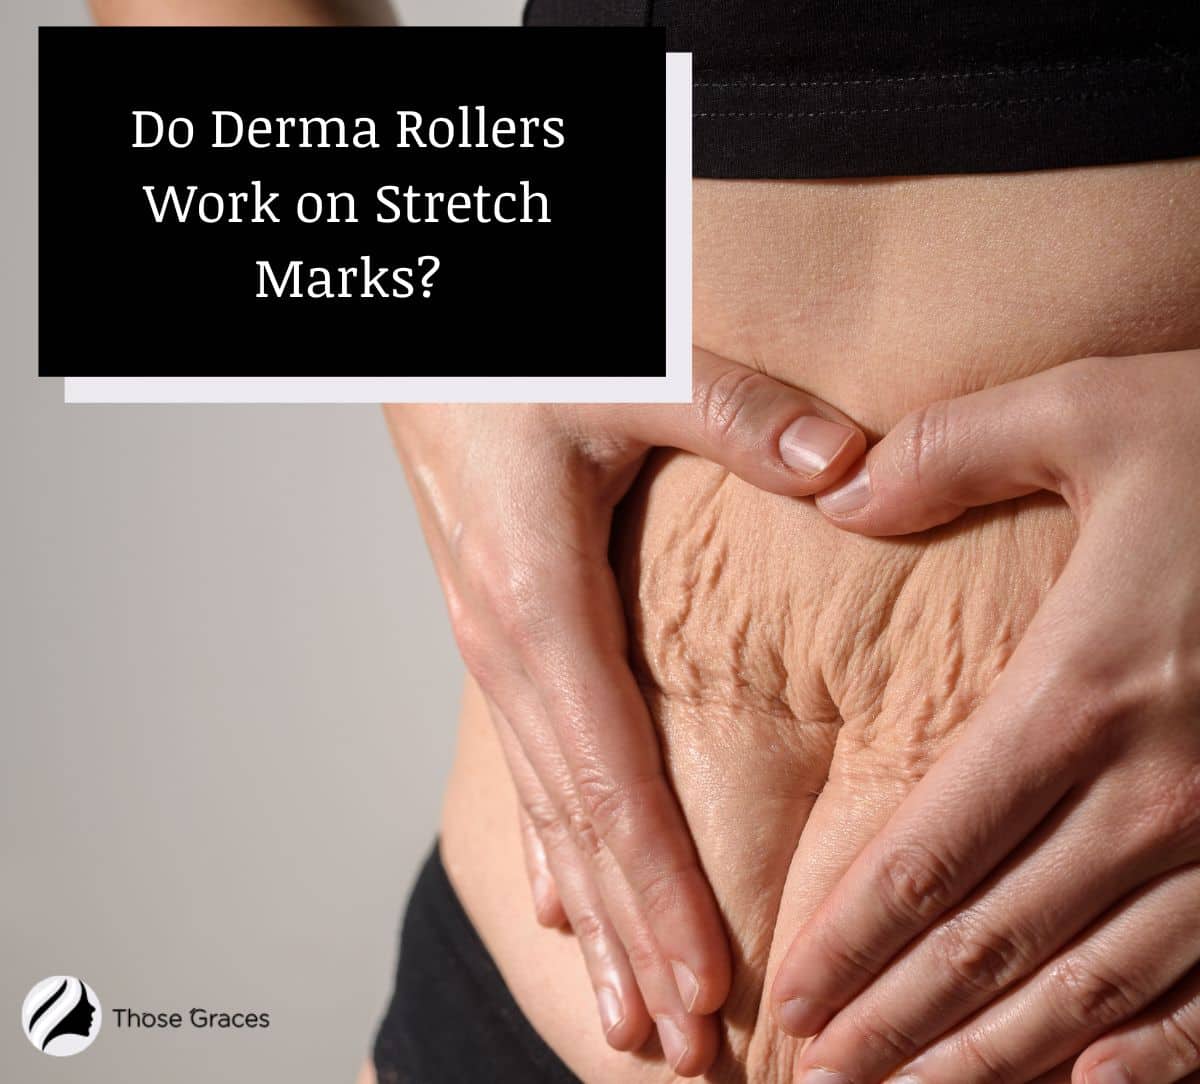 lady showing her stretch marks on the belly but Do Derma Rollers Really Work on Stretch Marks?